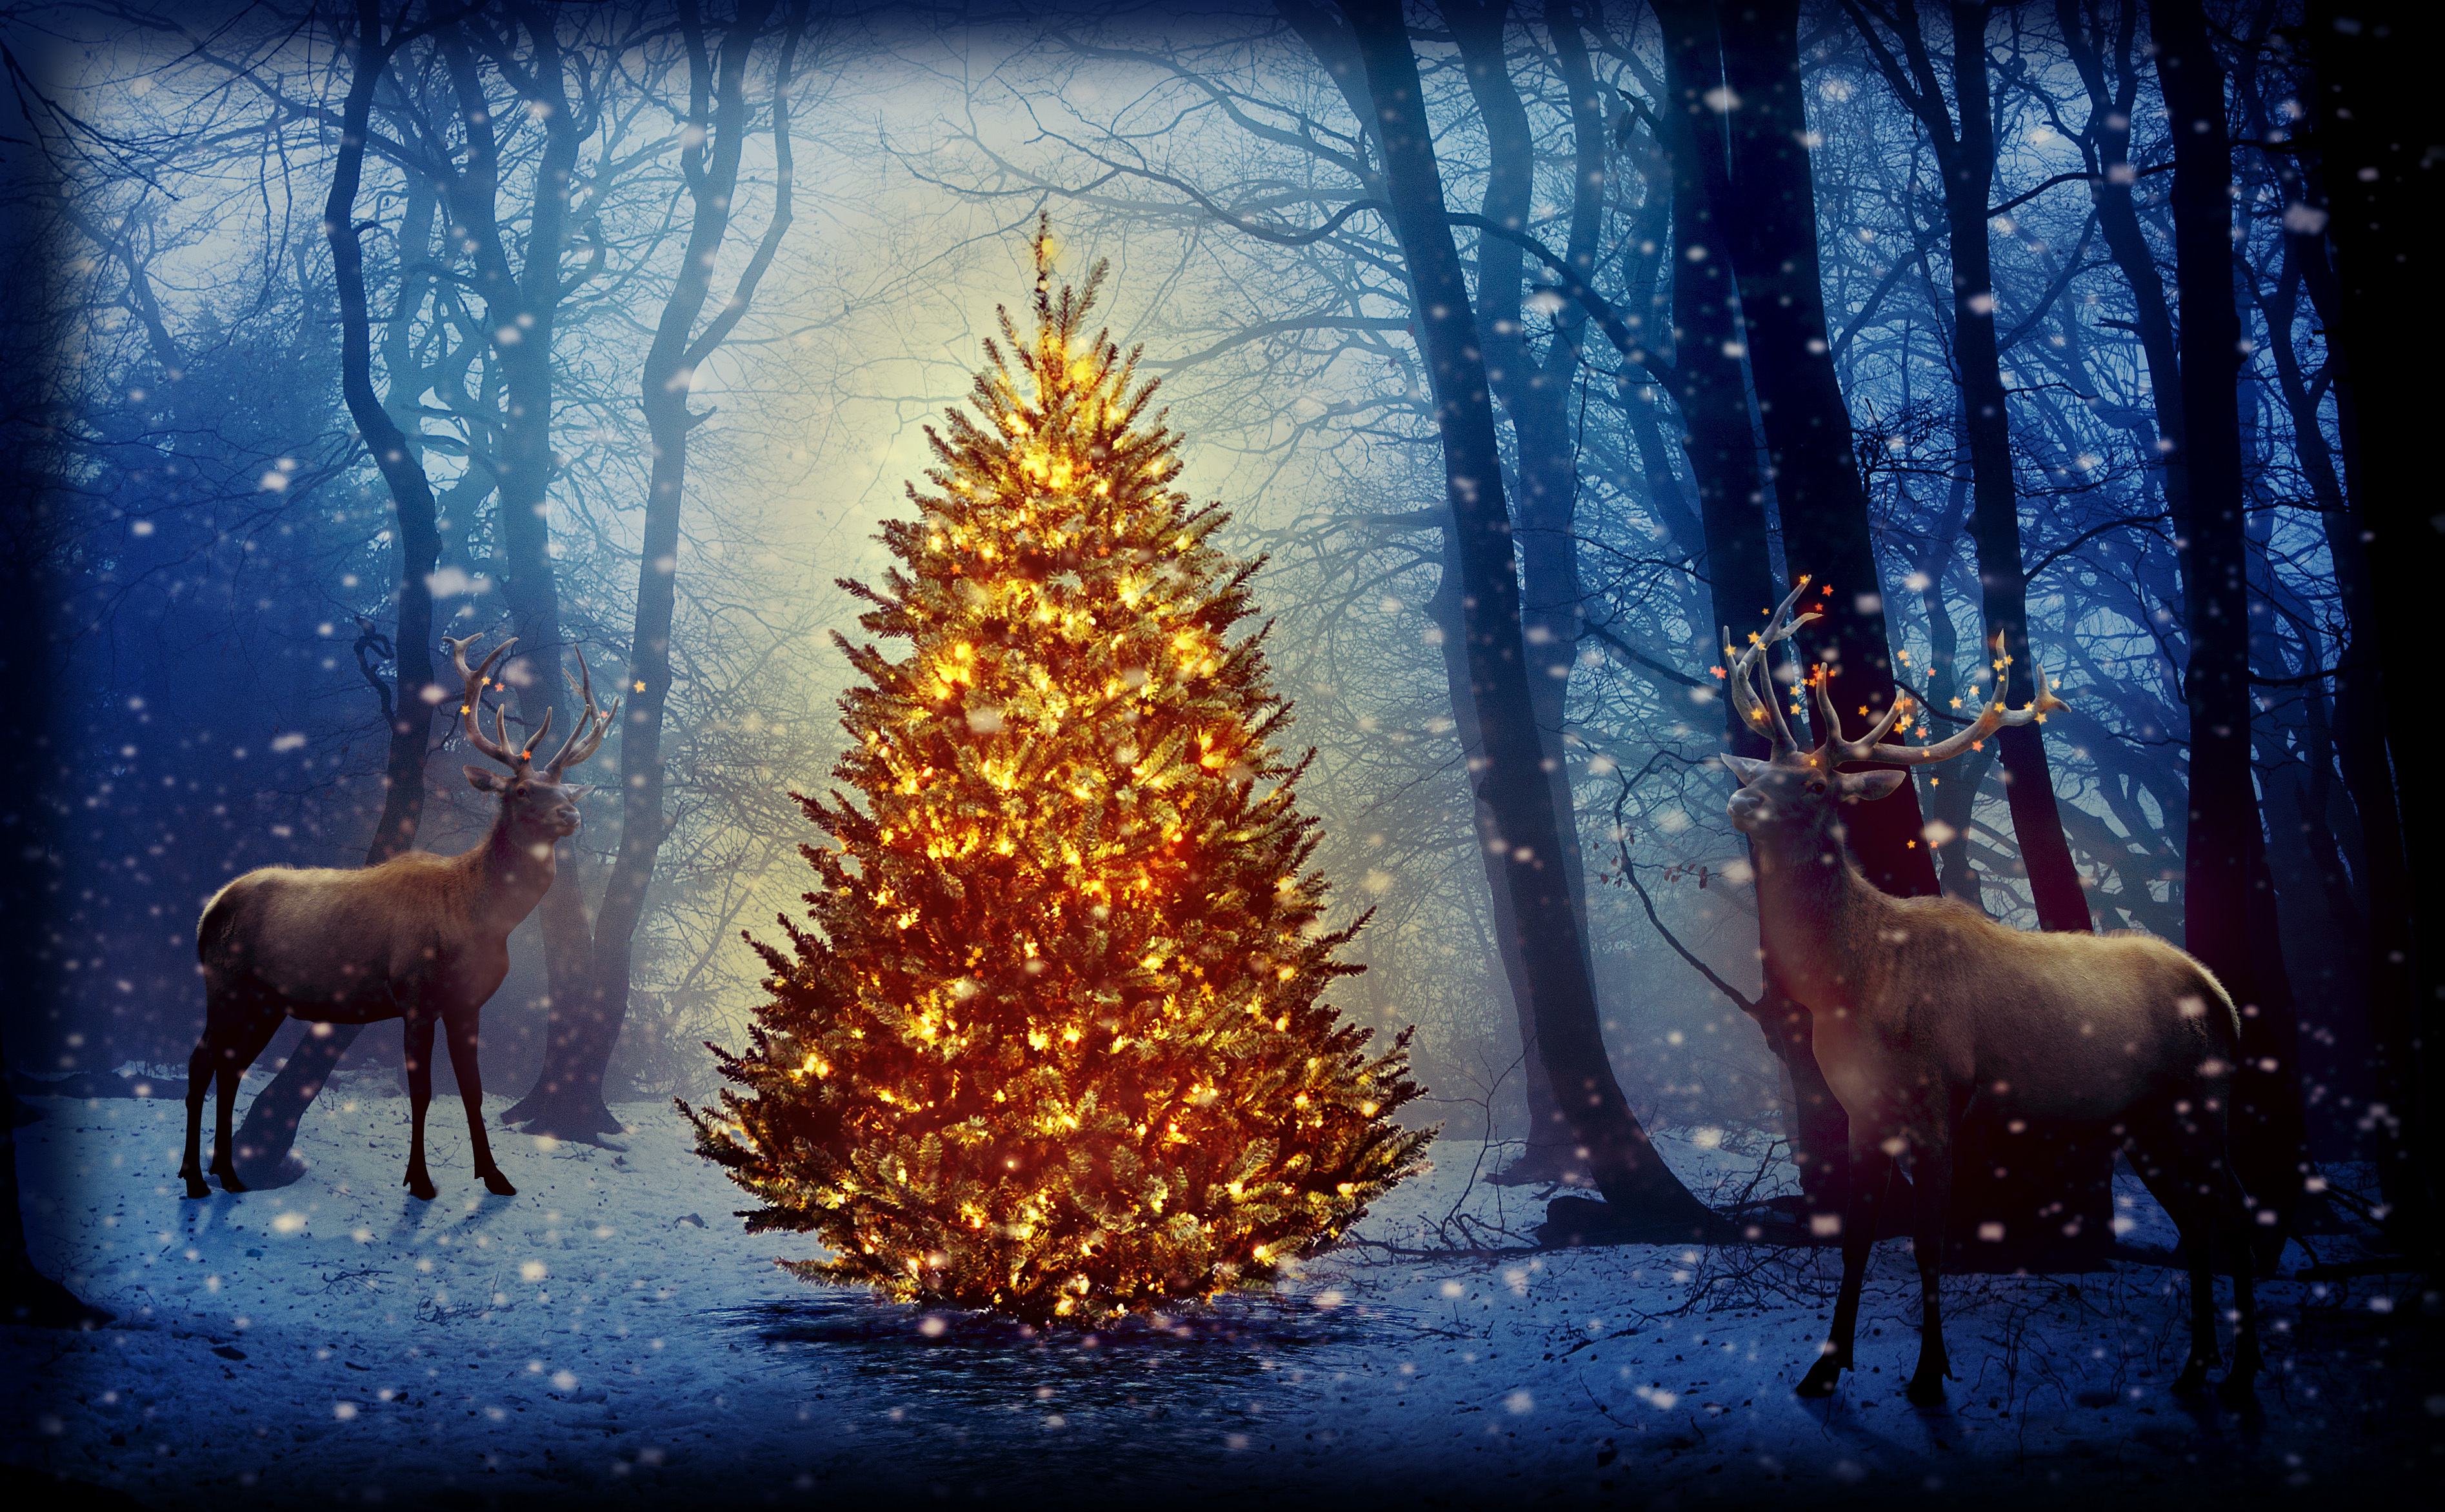 Bucks in the Christmas Forest HD Wallpaper